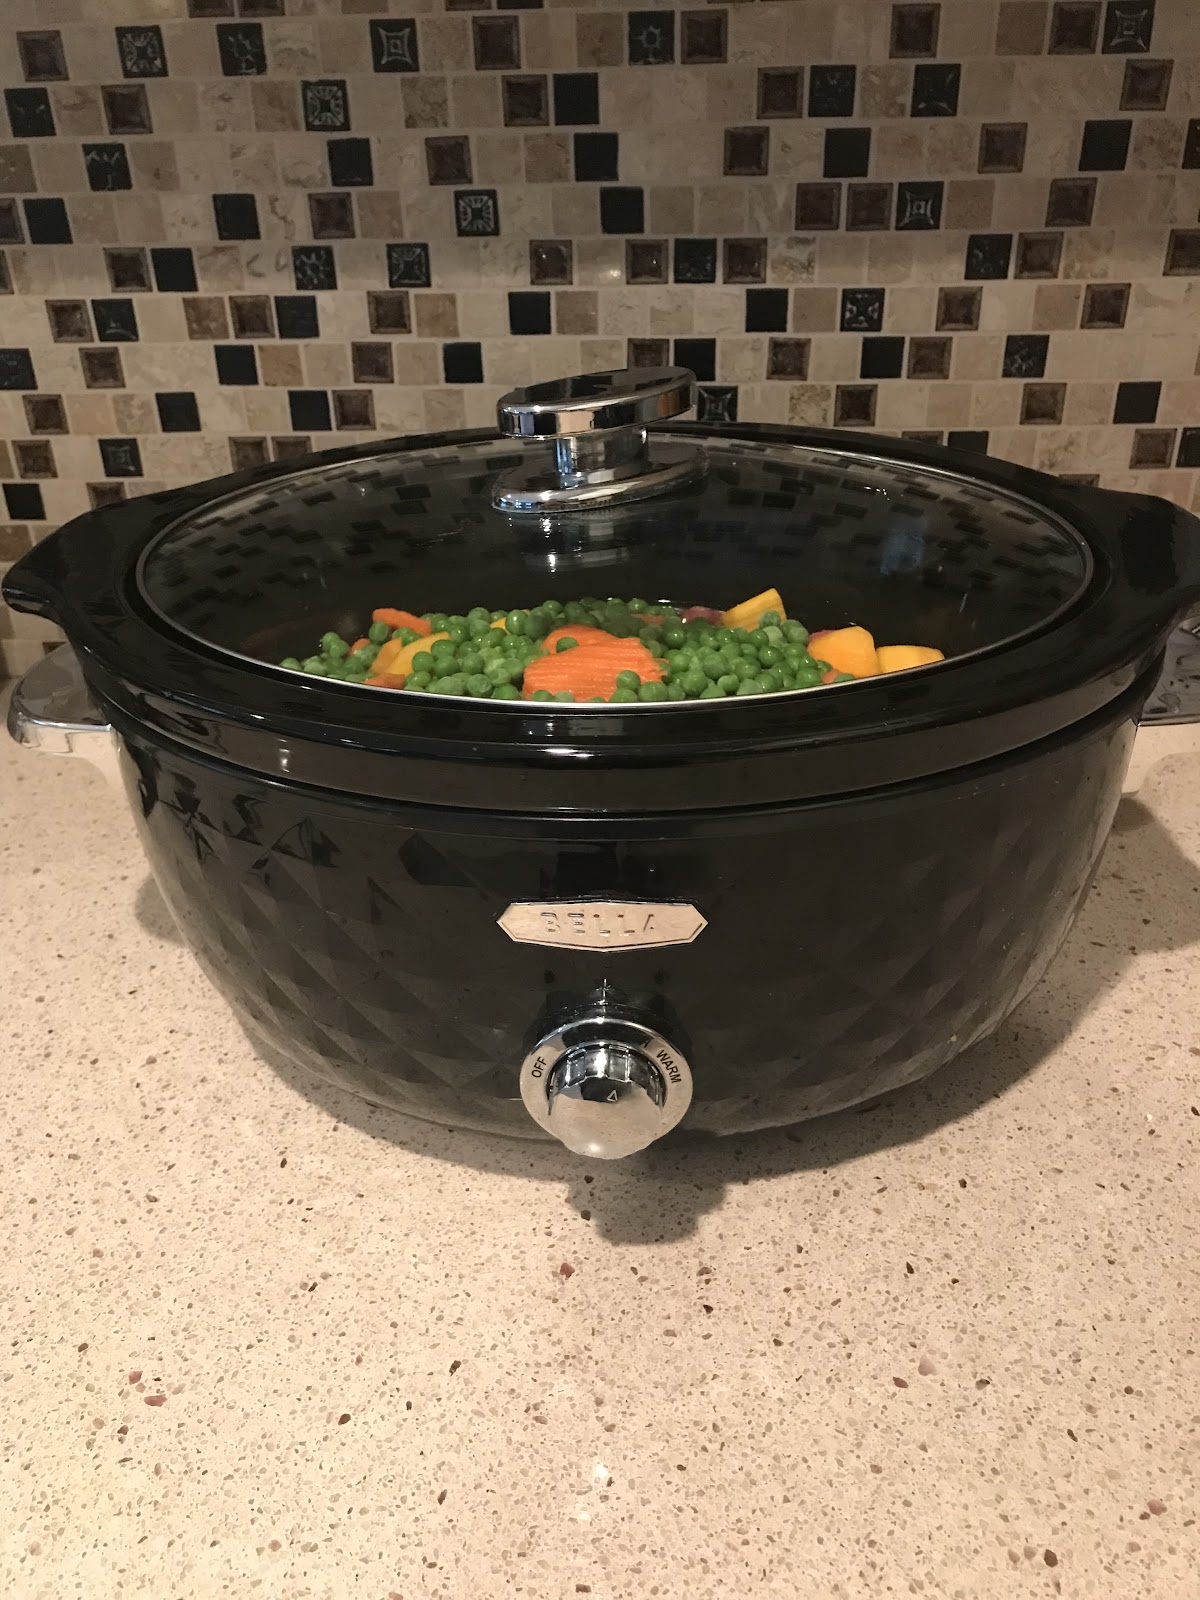 All Hail the Inventor of the Crock Pot: Irving Nachumsohn - Longreads